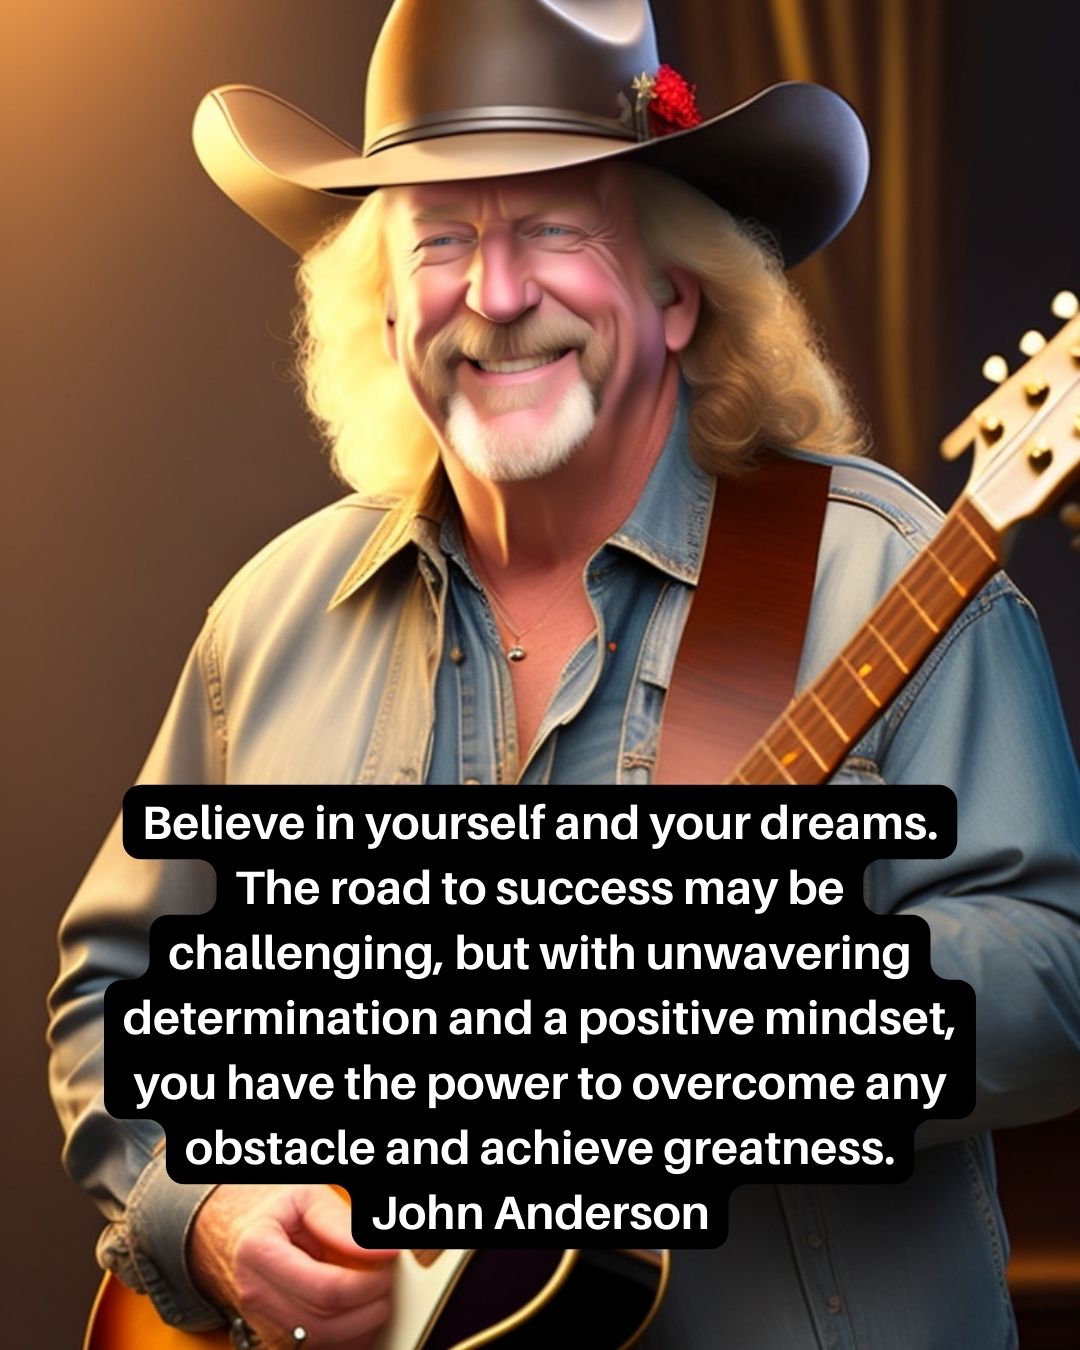 Motivational quote from John Anderson